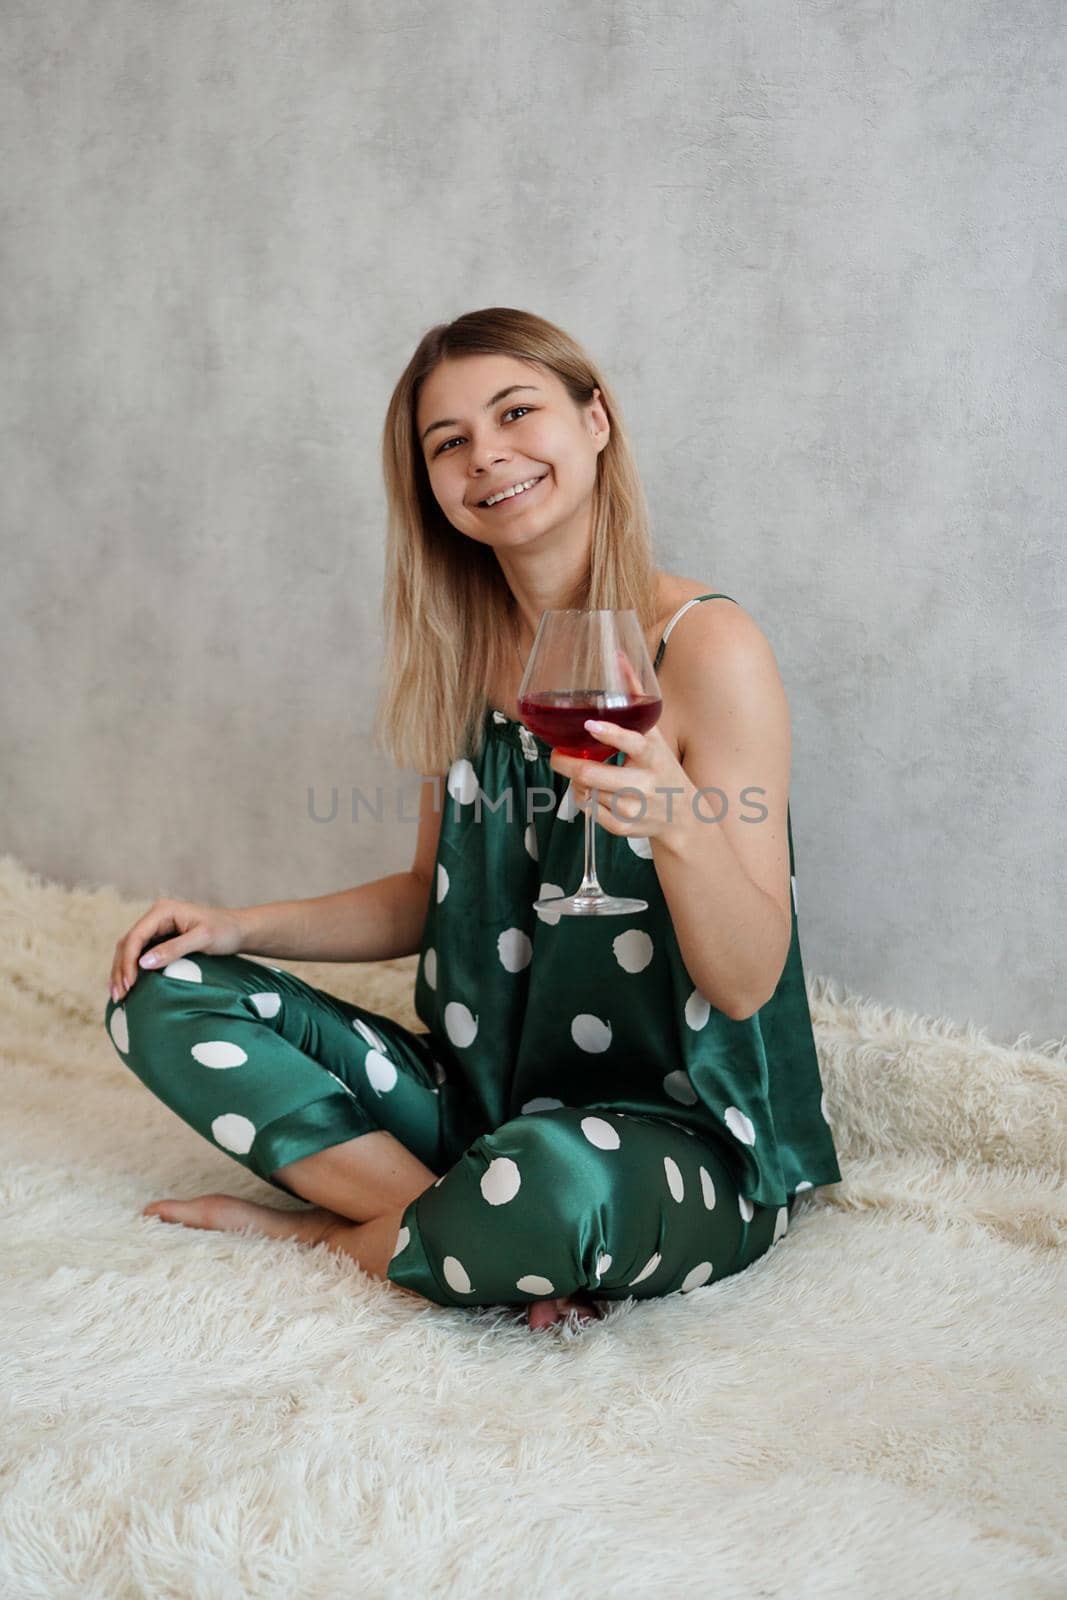 Girl in green pajamas in bed with a glass of red wine by natali_brill